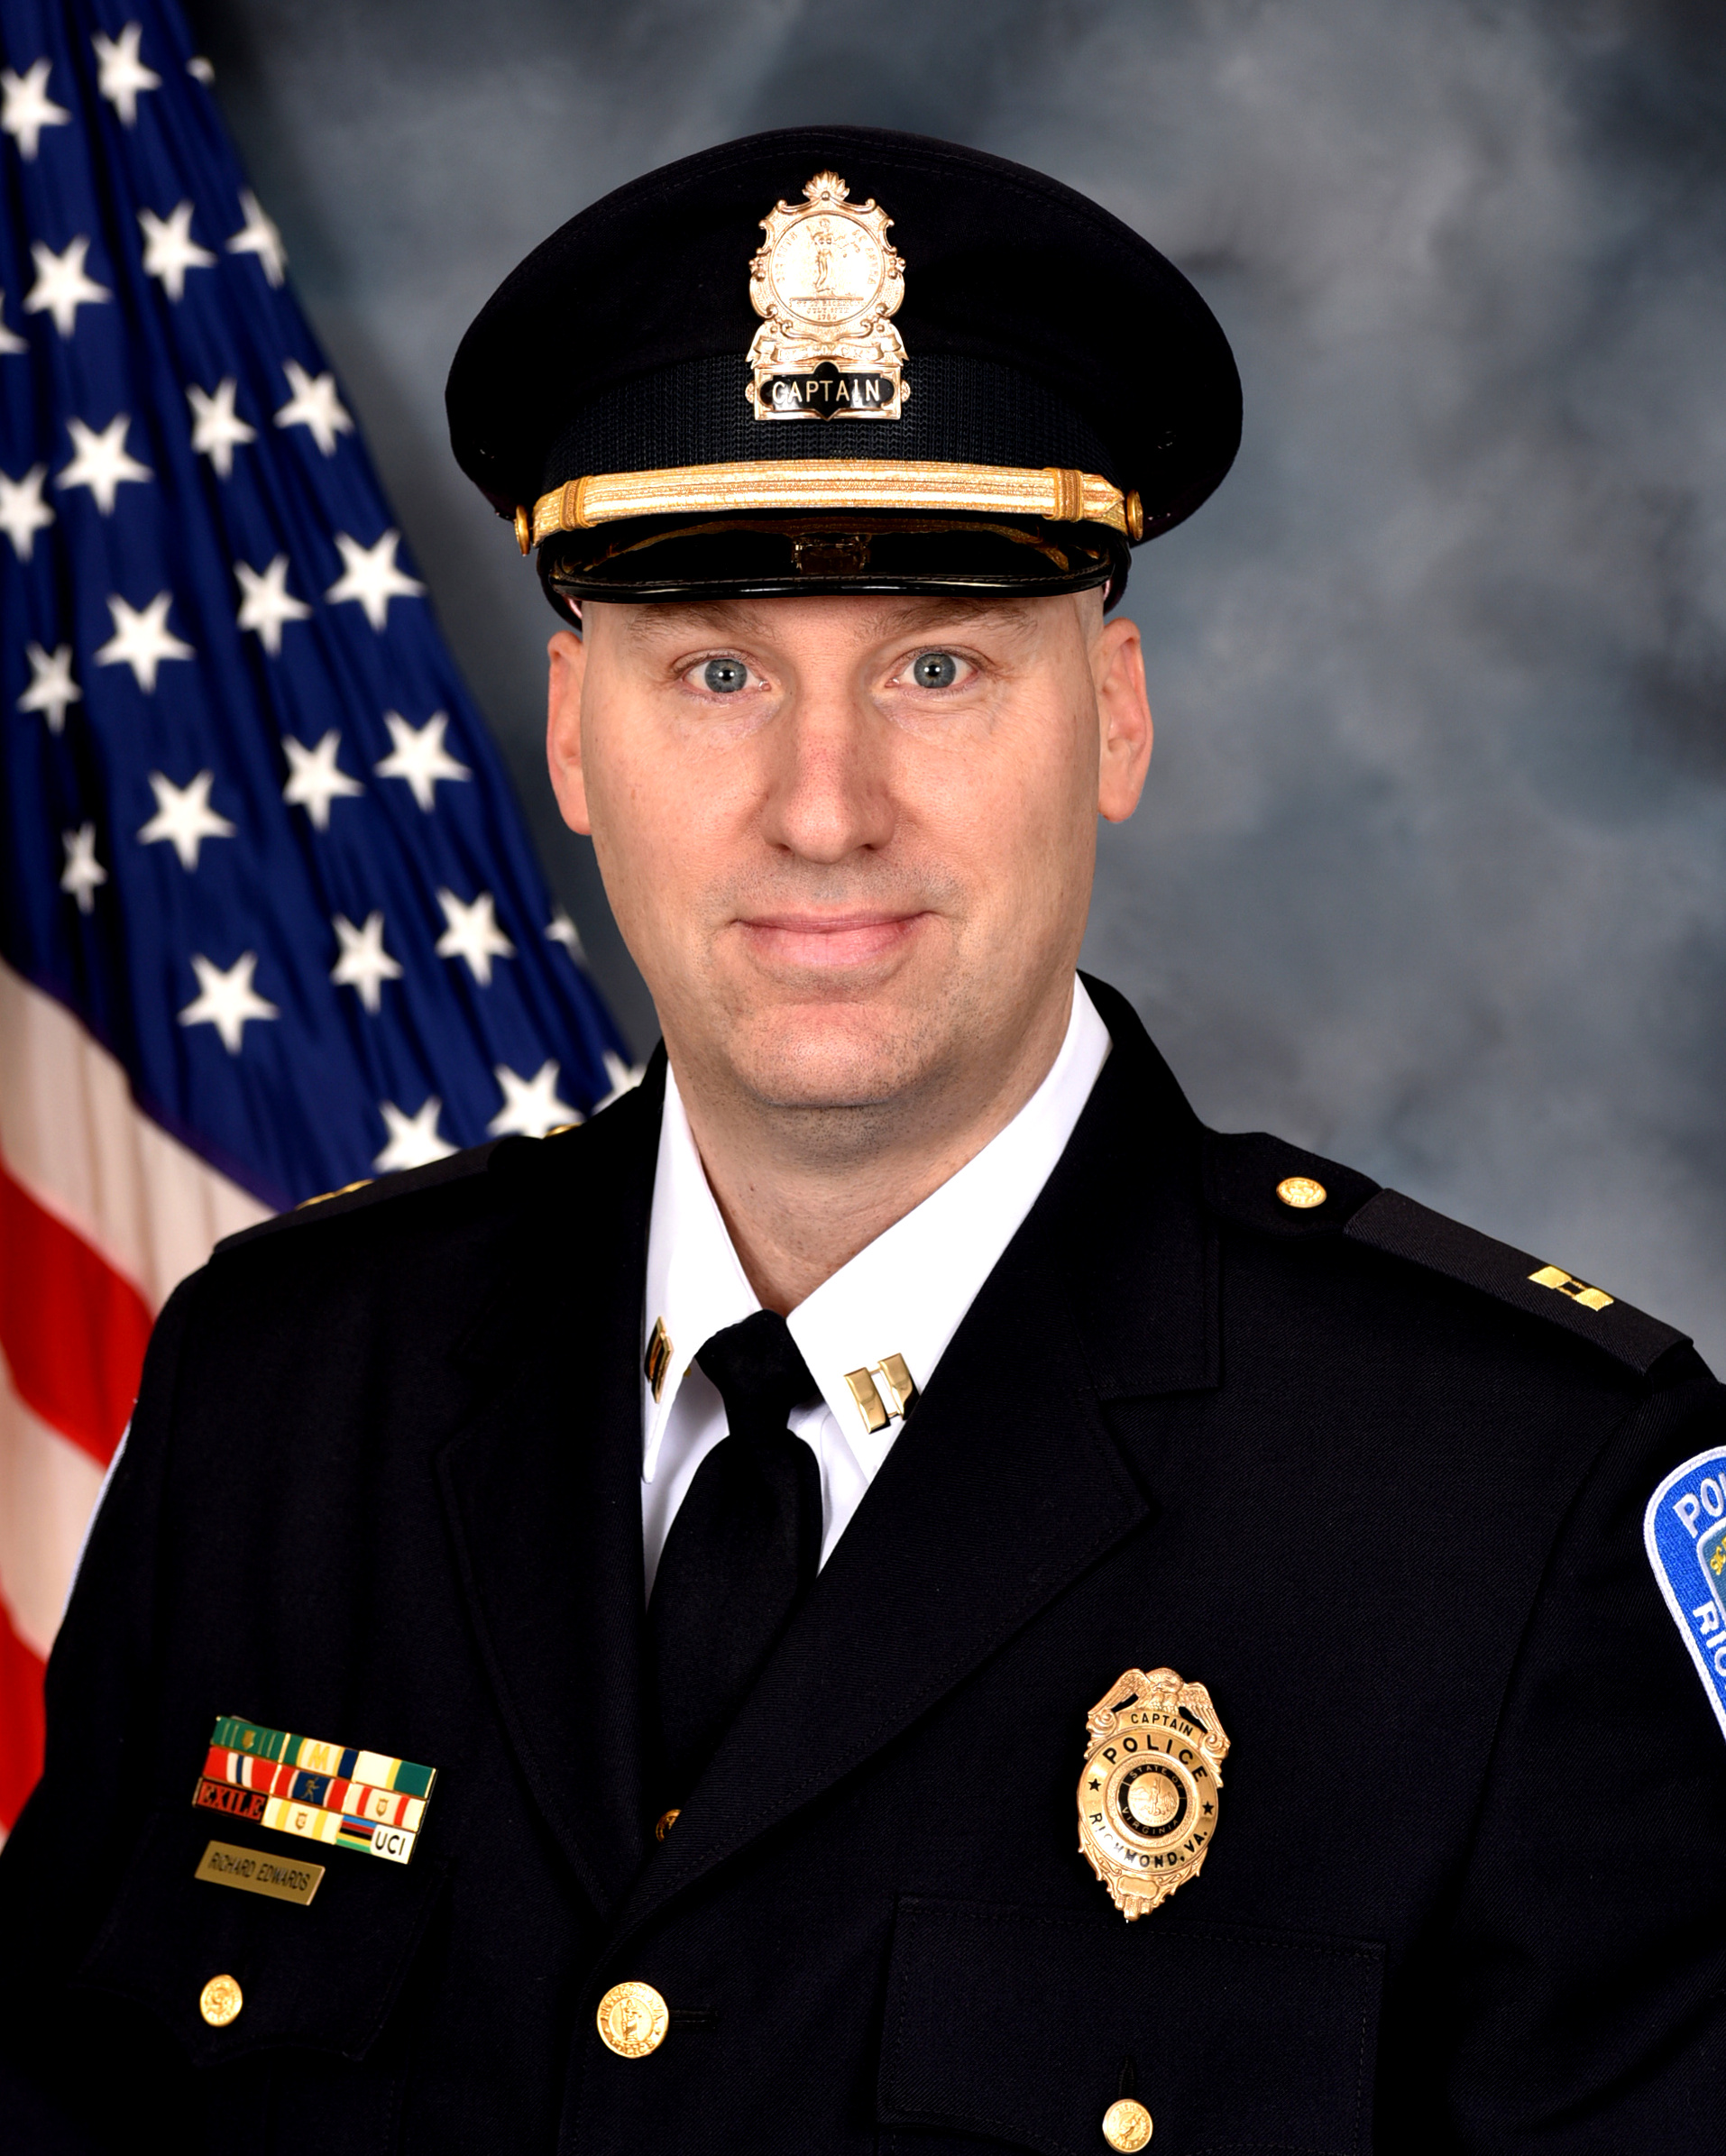 Acting Chief of Police Rick Edwards